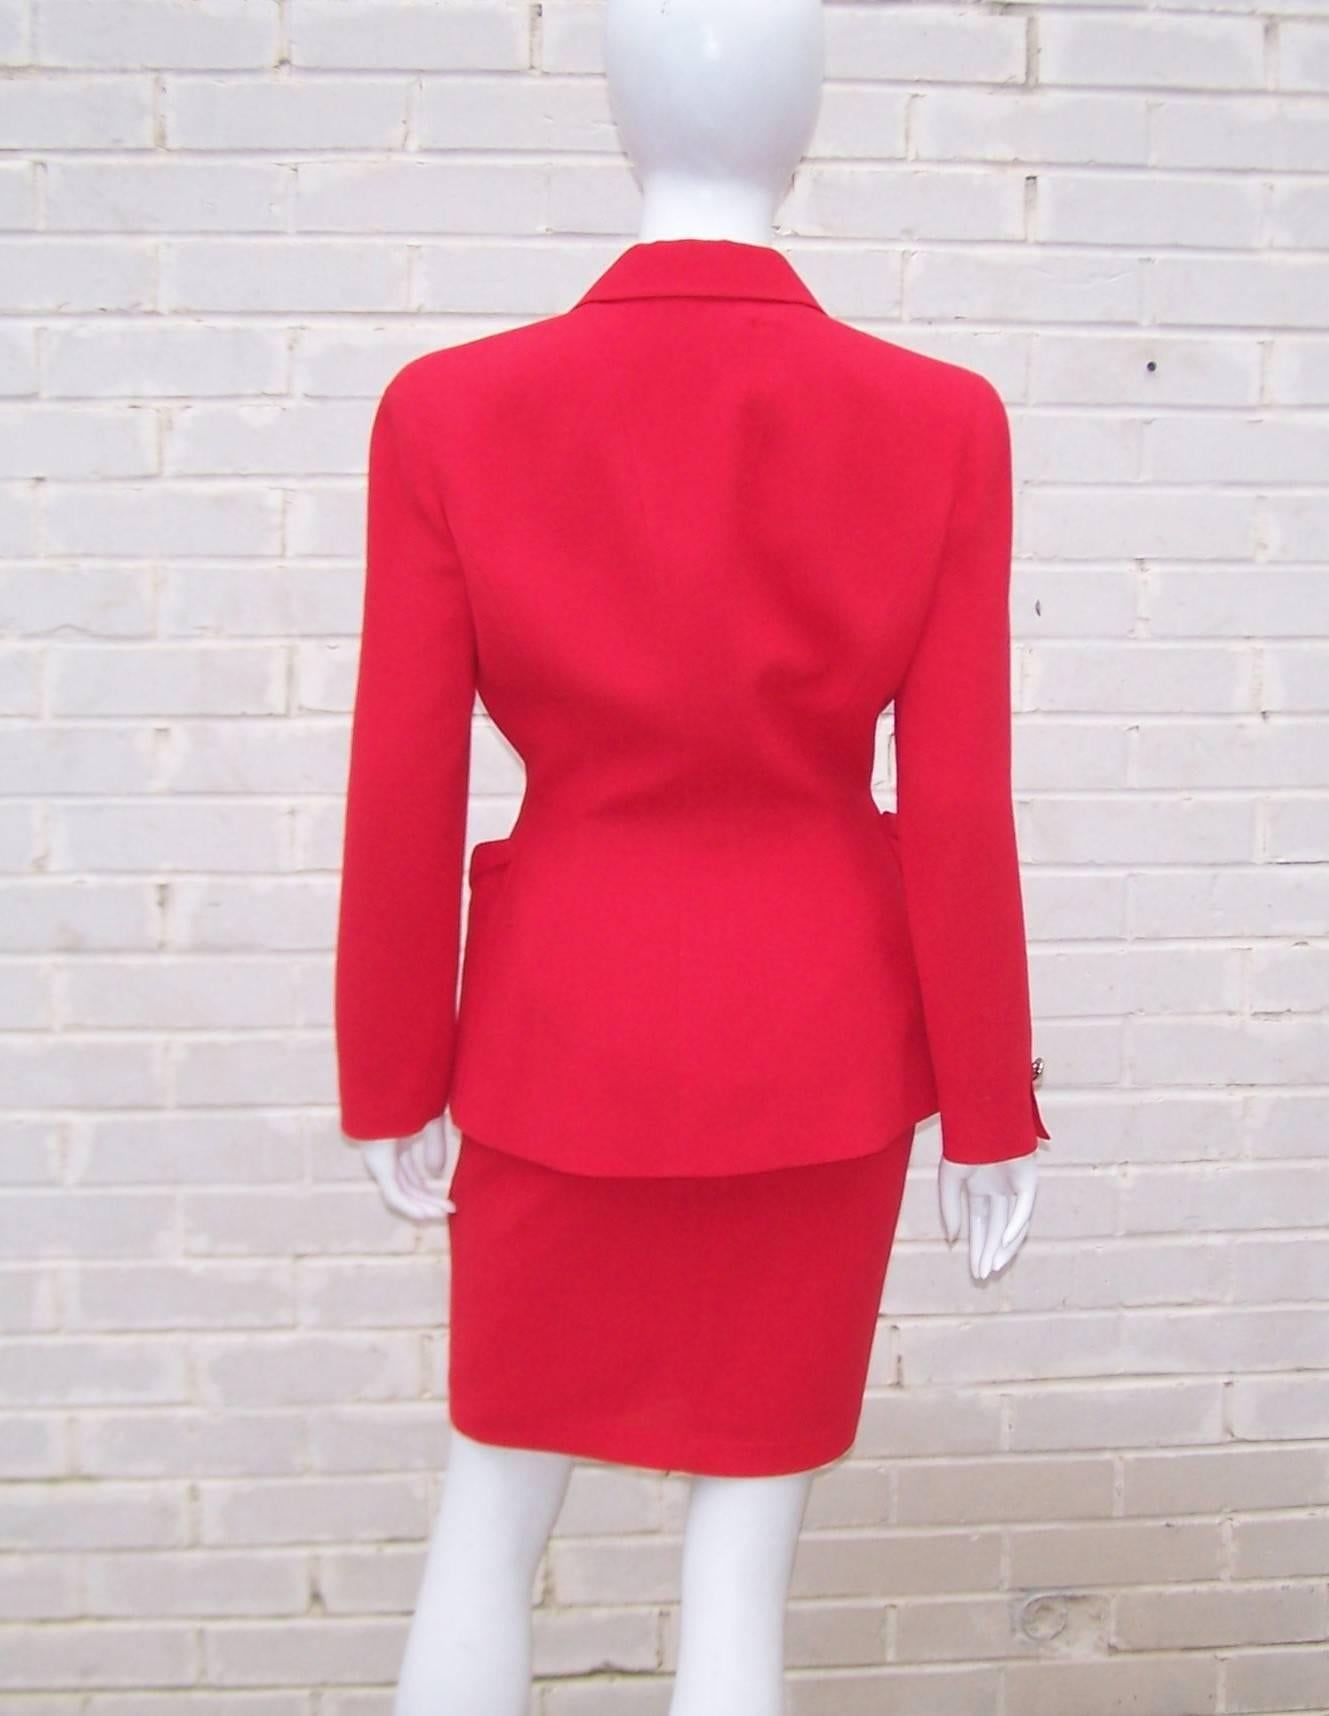 Women's 1980's Thierry Mugler Lipstick Red Suit With Silver Buttons